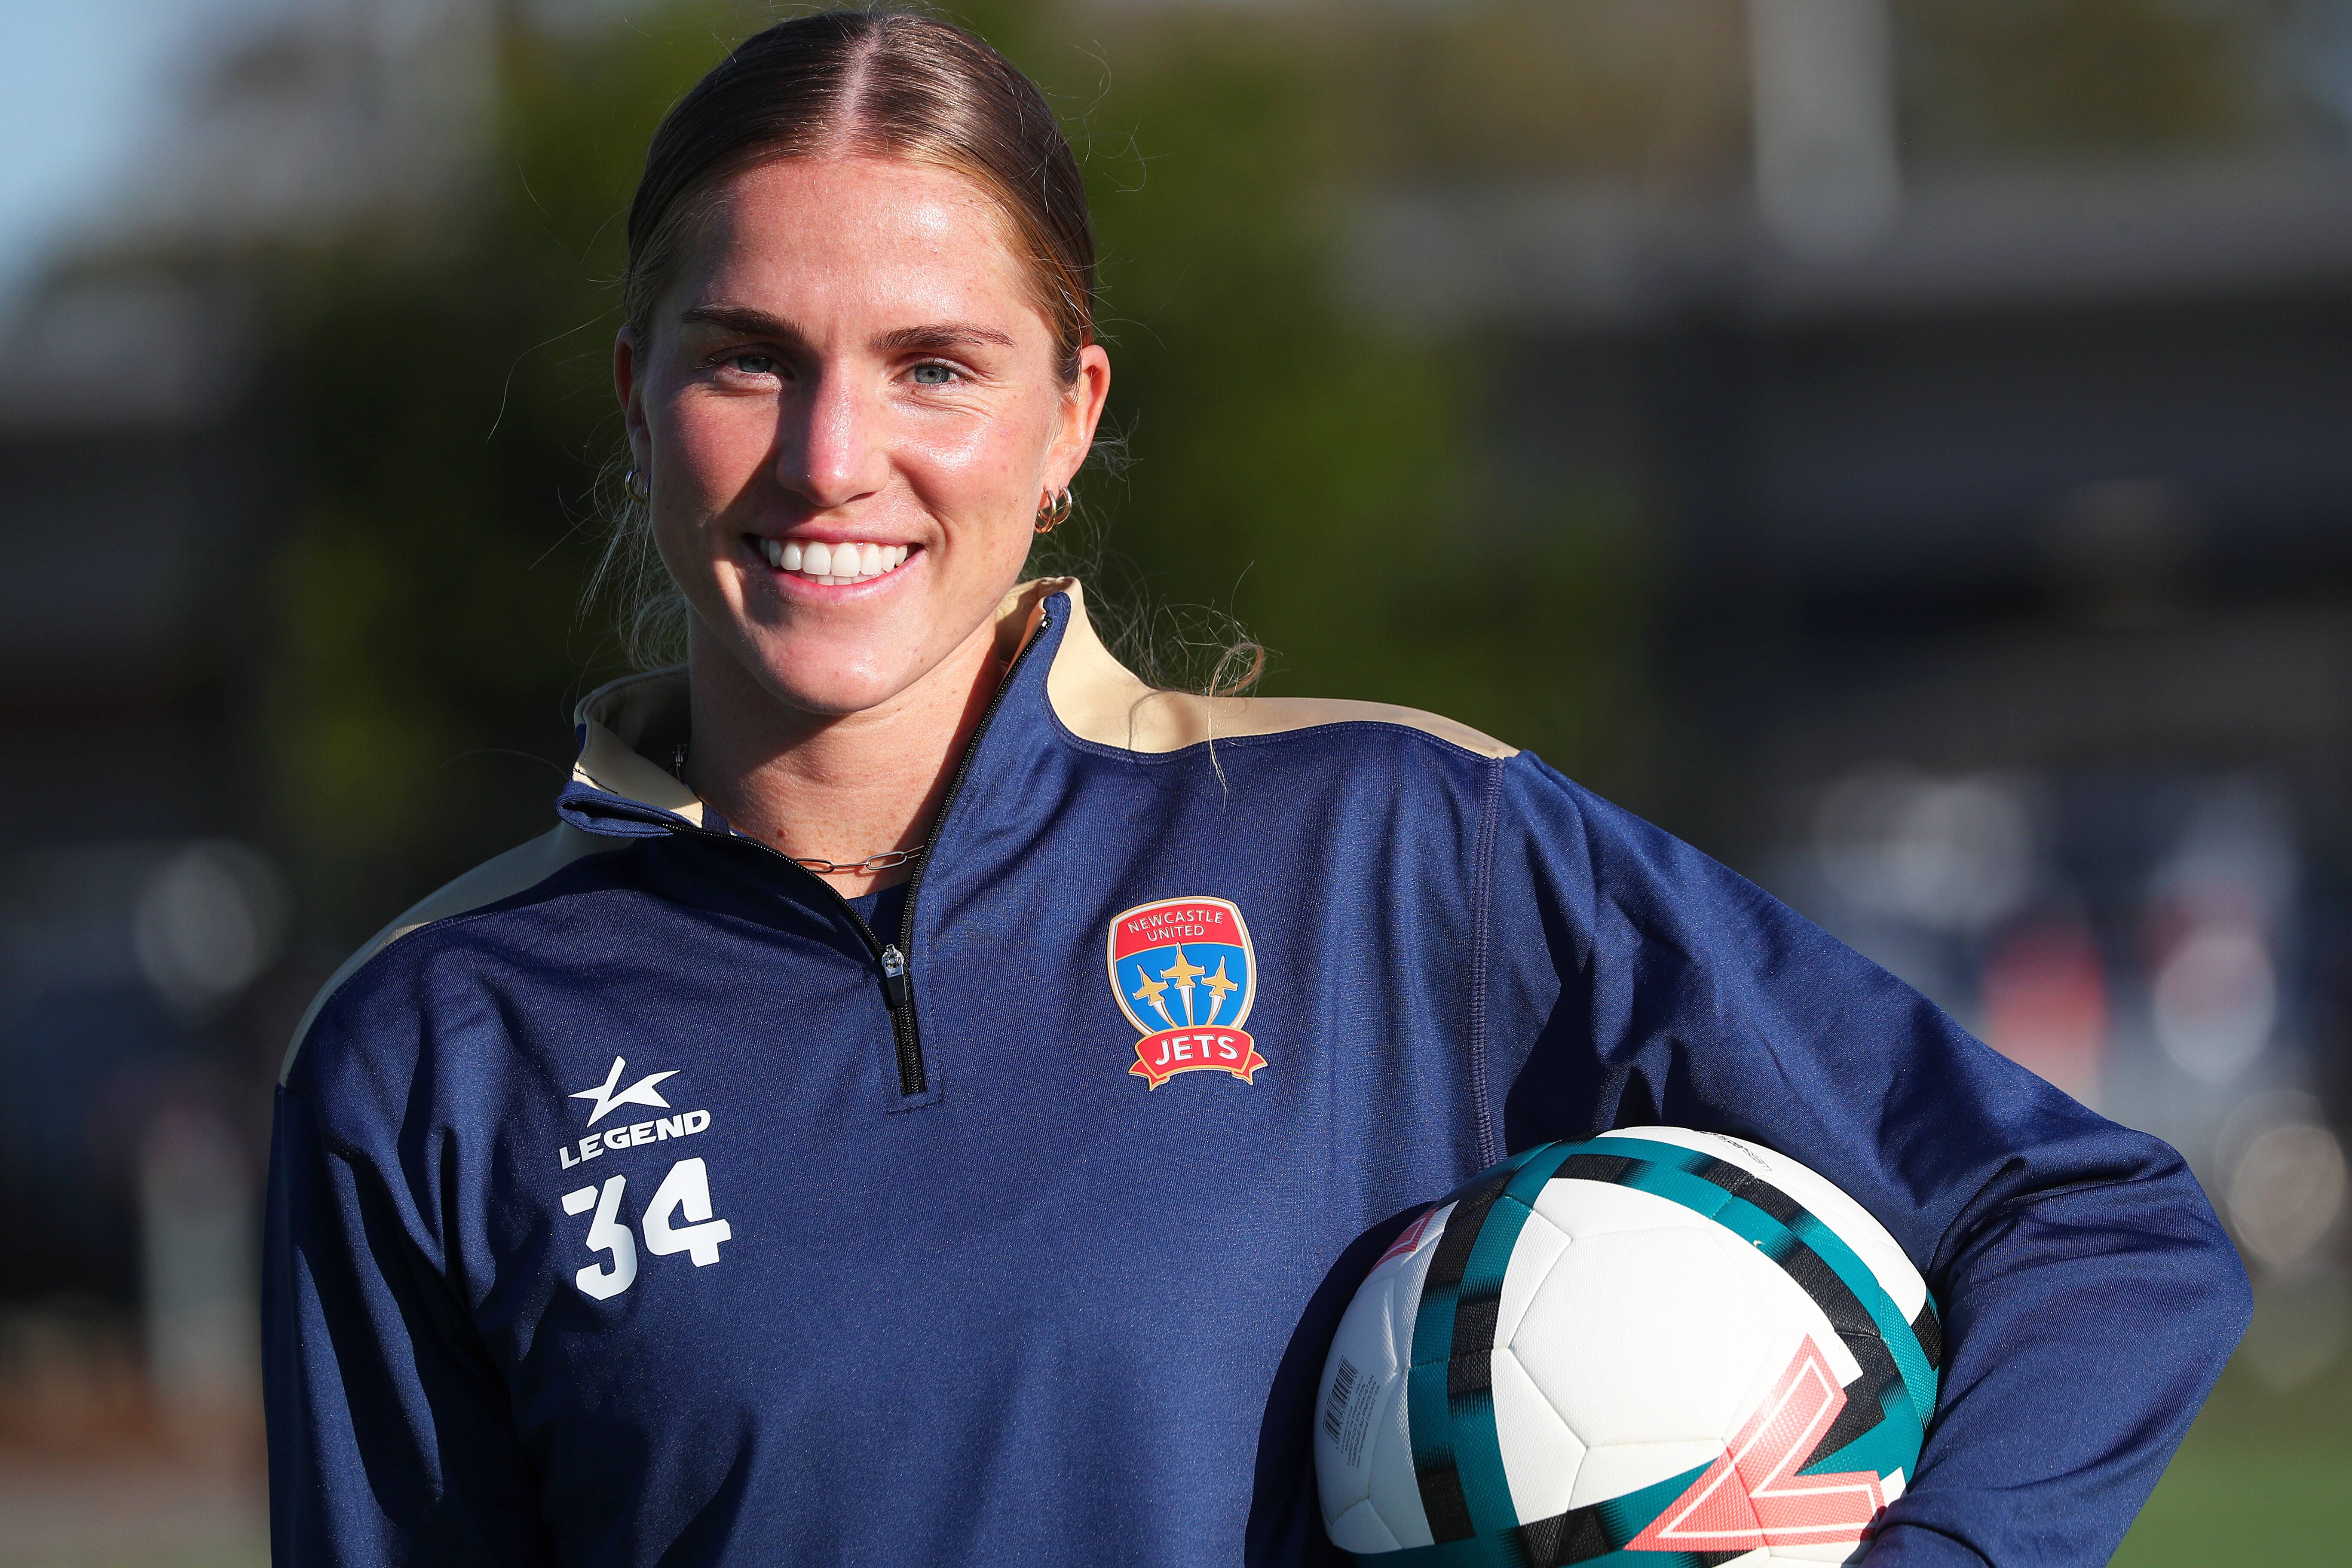 Jets defender Maggie Shaw to play in same number as dad: A-League